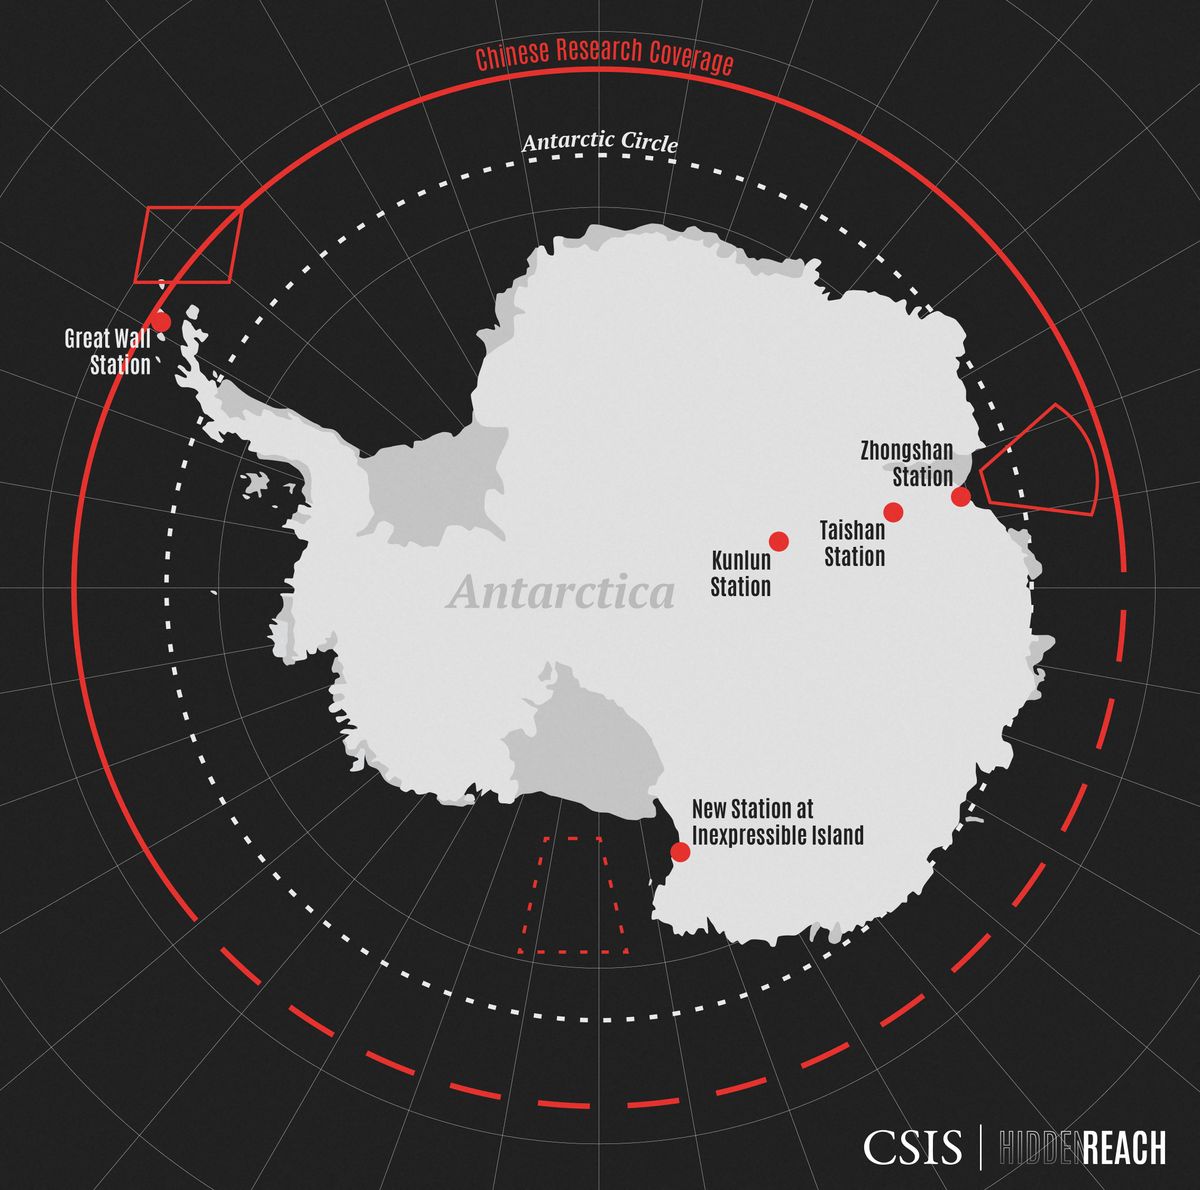 A map shows the locations of existing Chinese Antarctic stations and the Inexpressible Island site of a new station in this handout image.